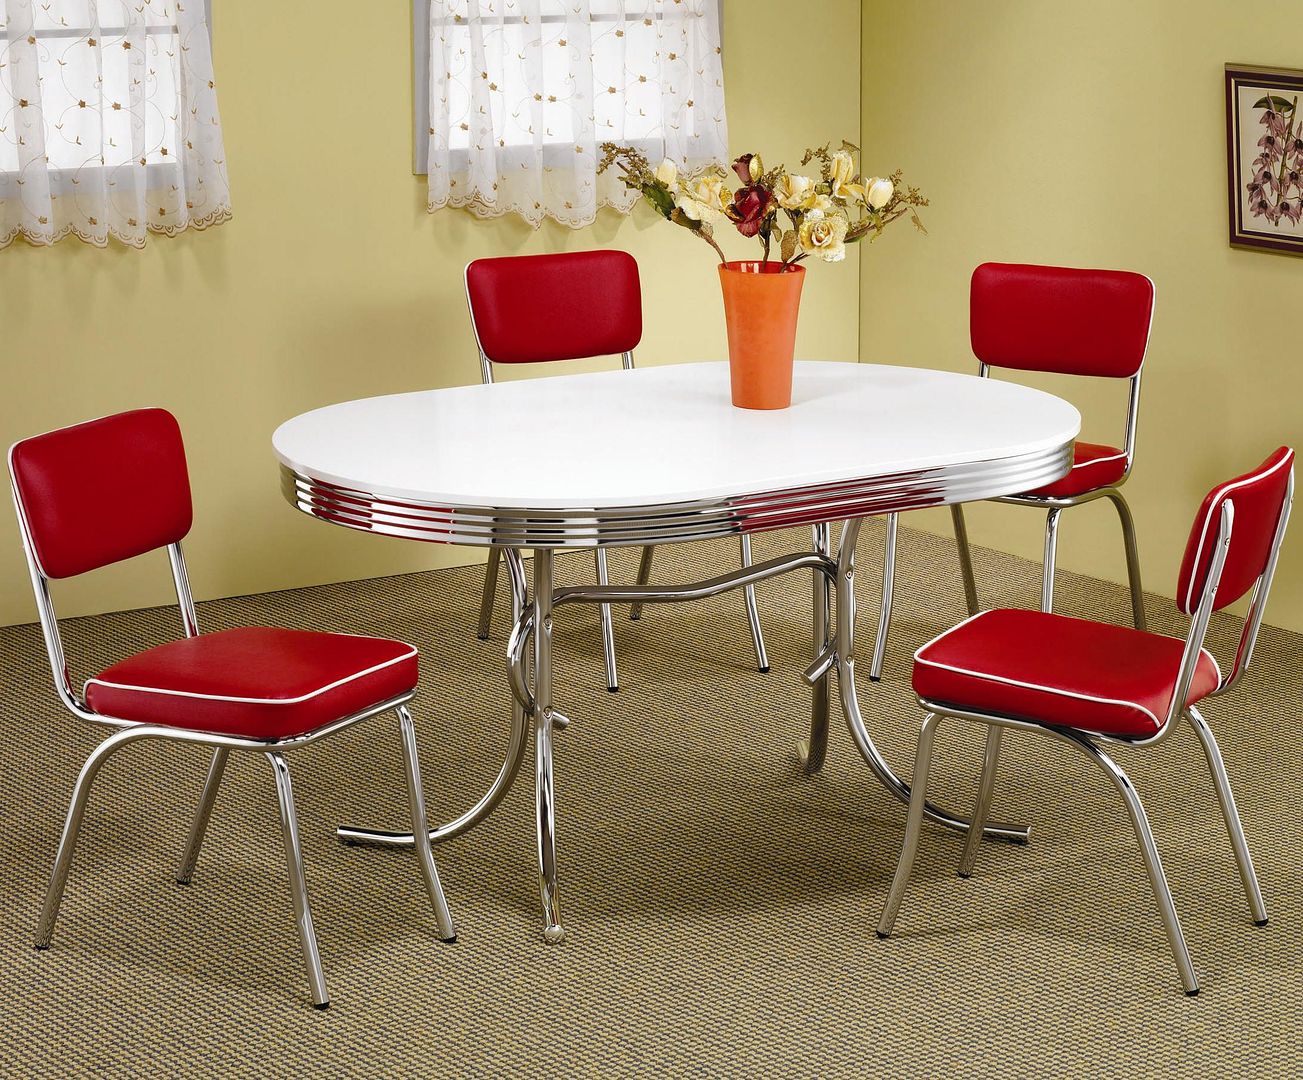 Retro 1950s Oval Dining Table And Red Chair 5 Piece Set By Coaster 2065 2450r 21032067274 Ebay